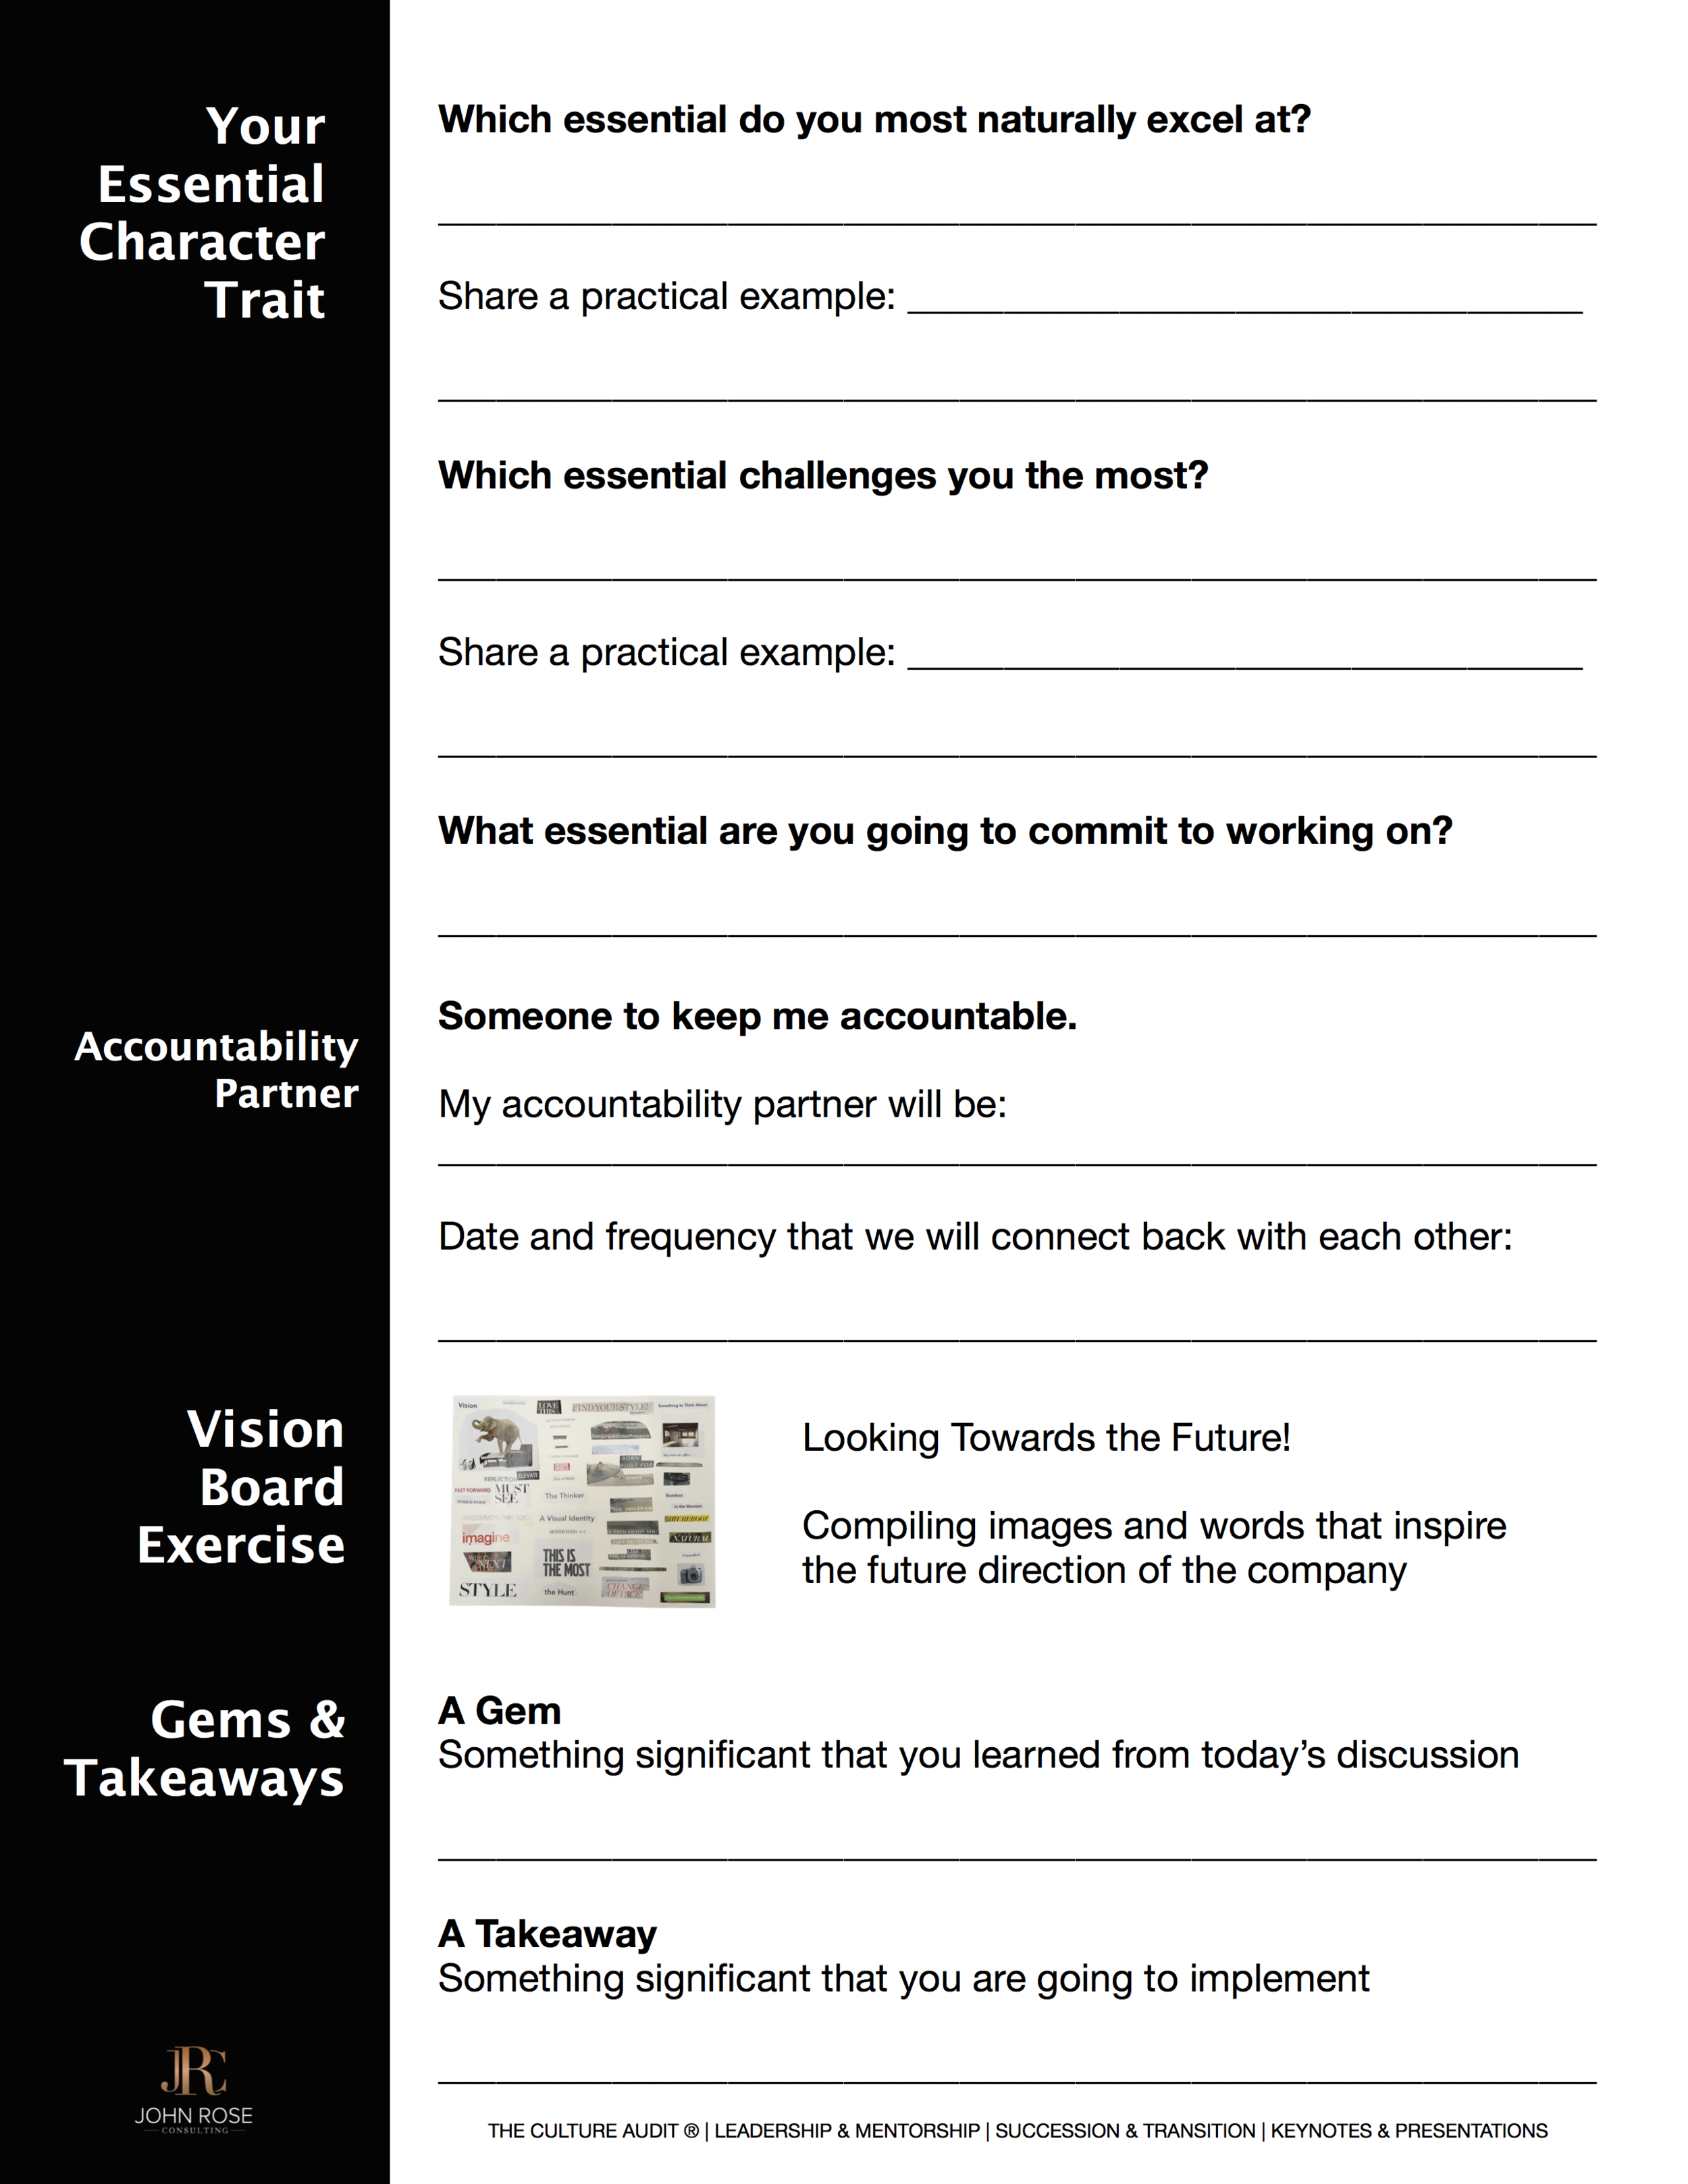 Five Essentials to Shape and Inspire Leadership Handout (Template) (dragged) 4.png